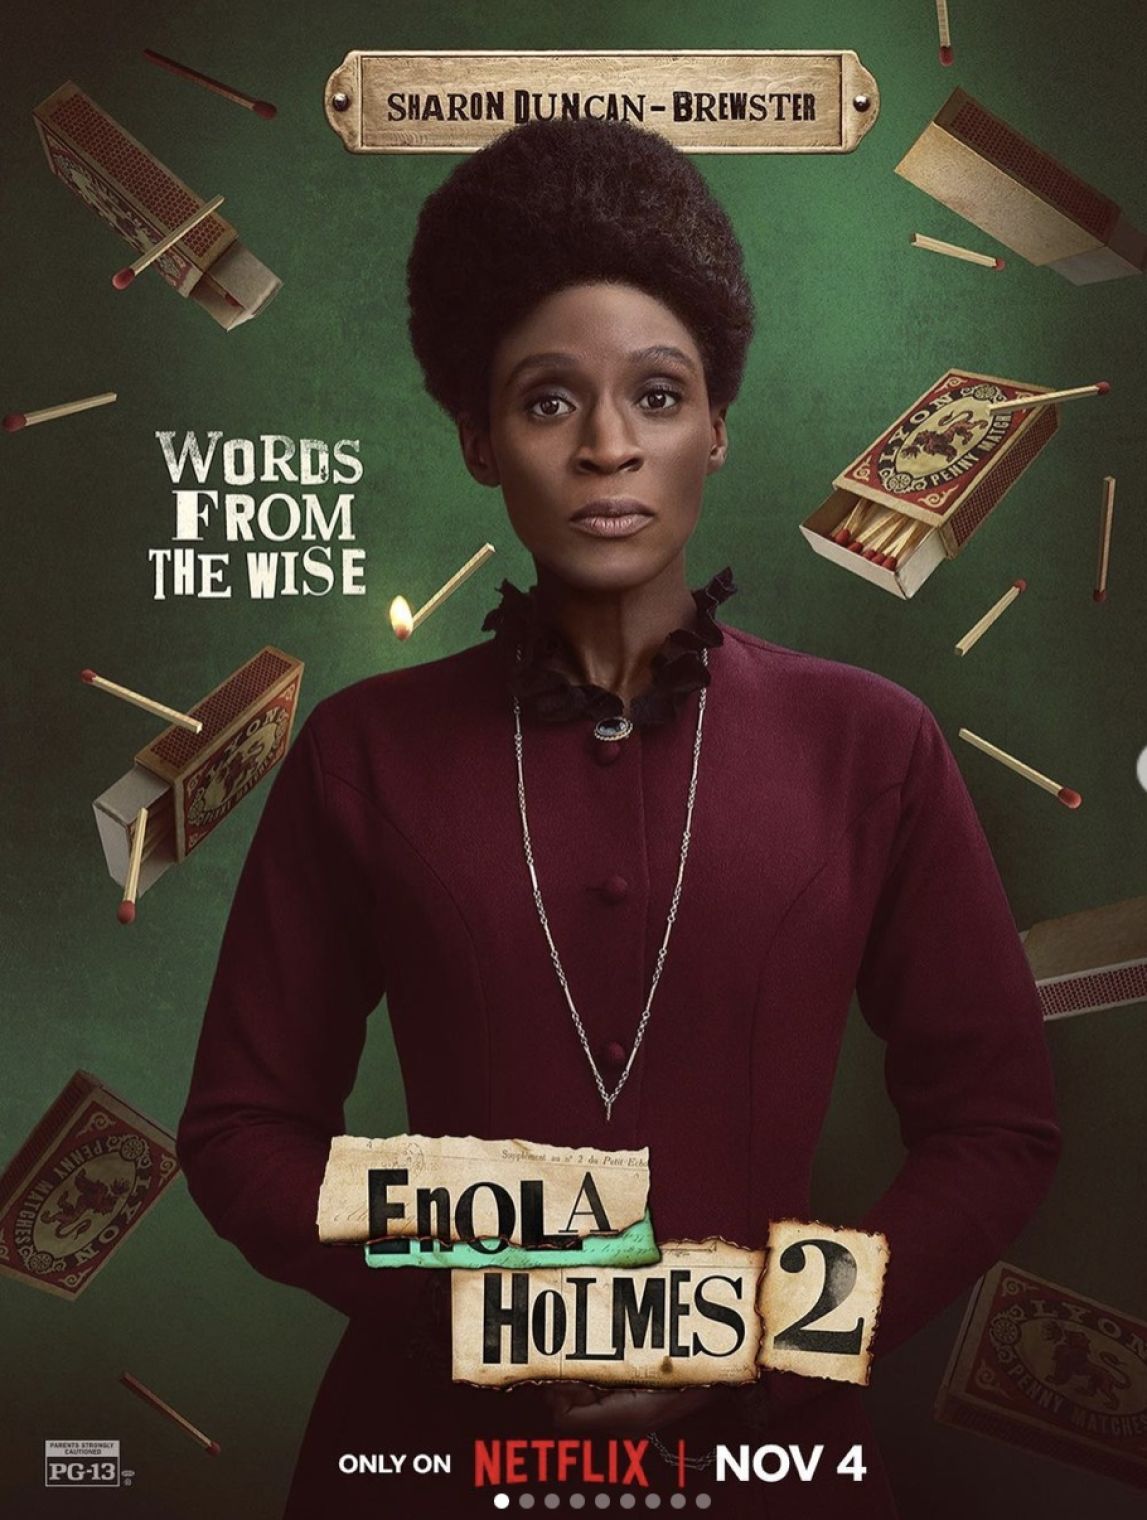 Sharon Duncan-Brewster stars in Enola Holmes 2 which is out on Netflix today